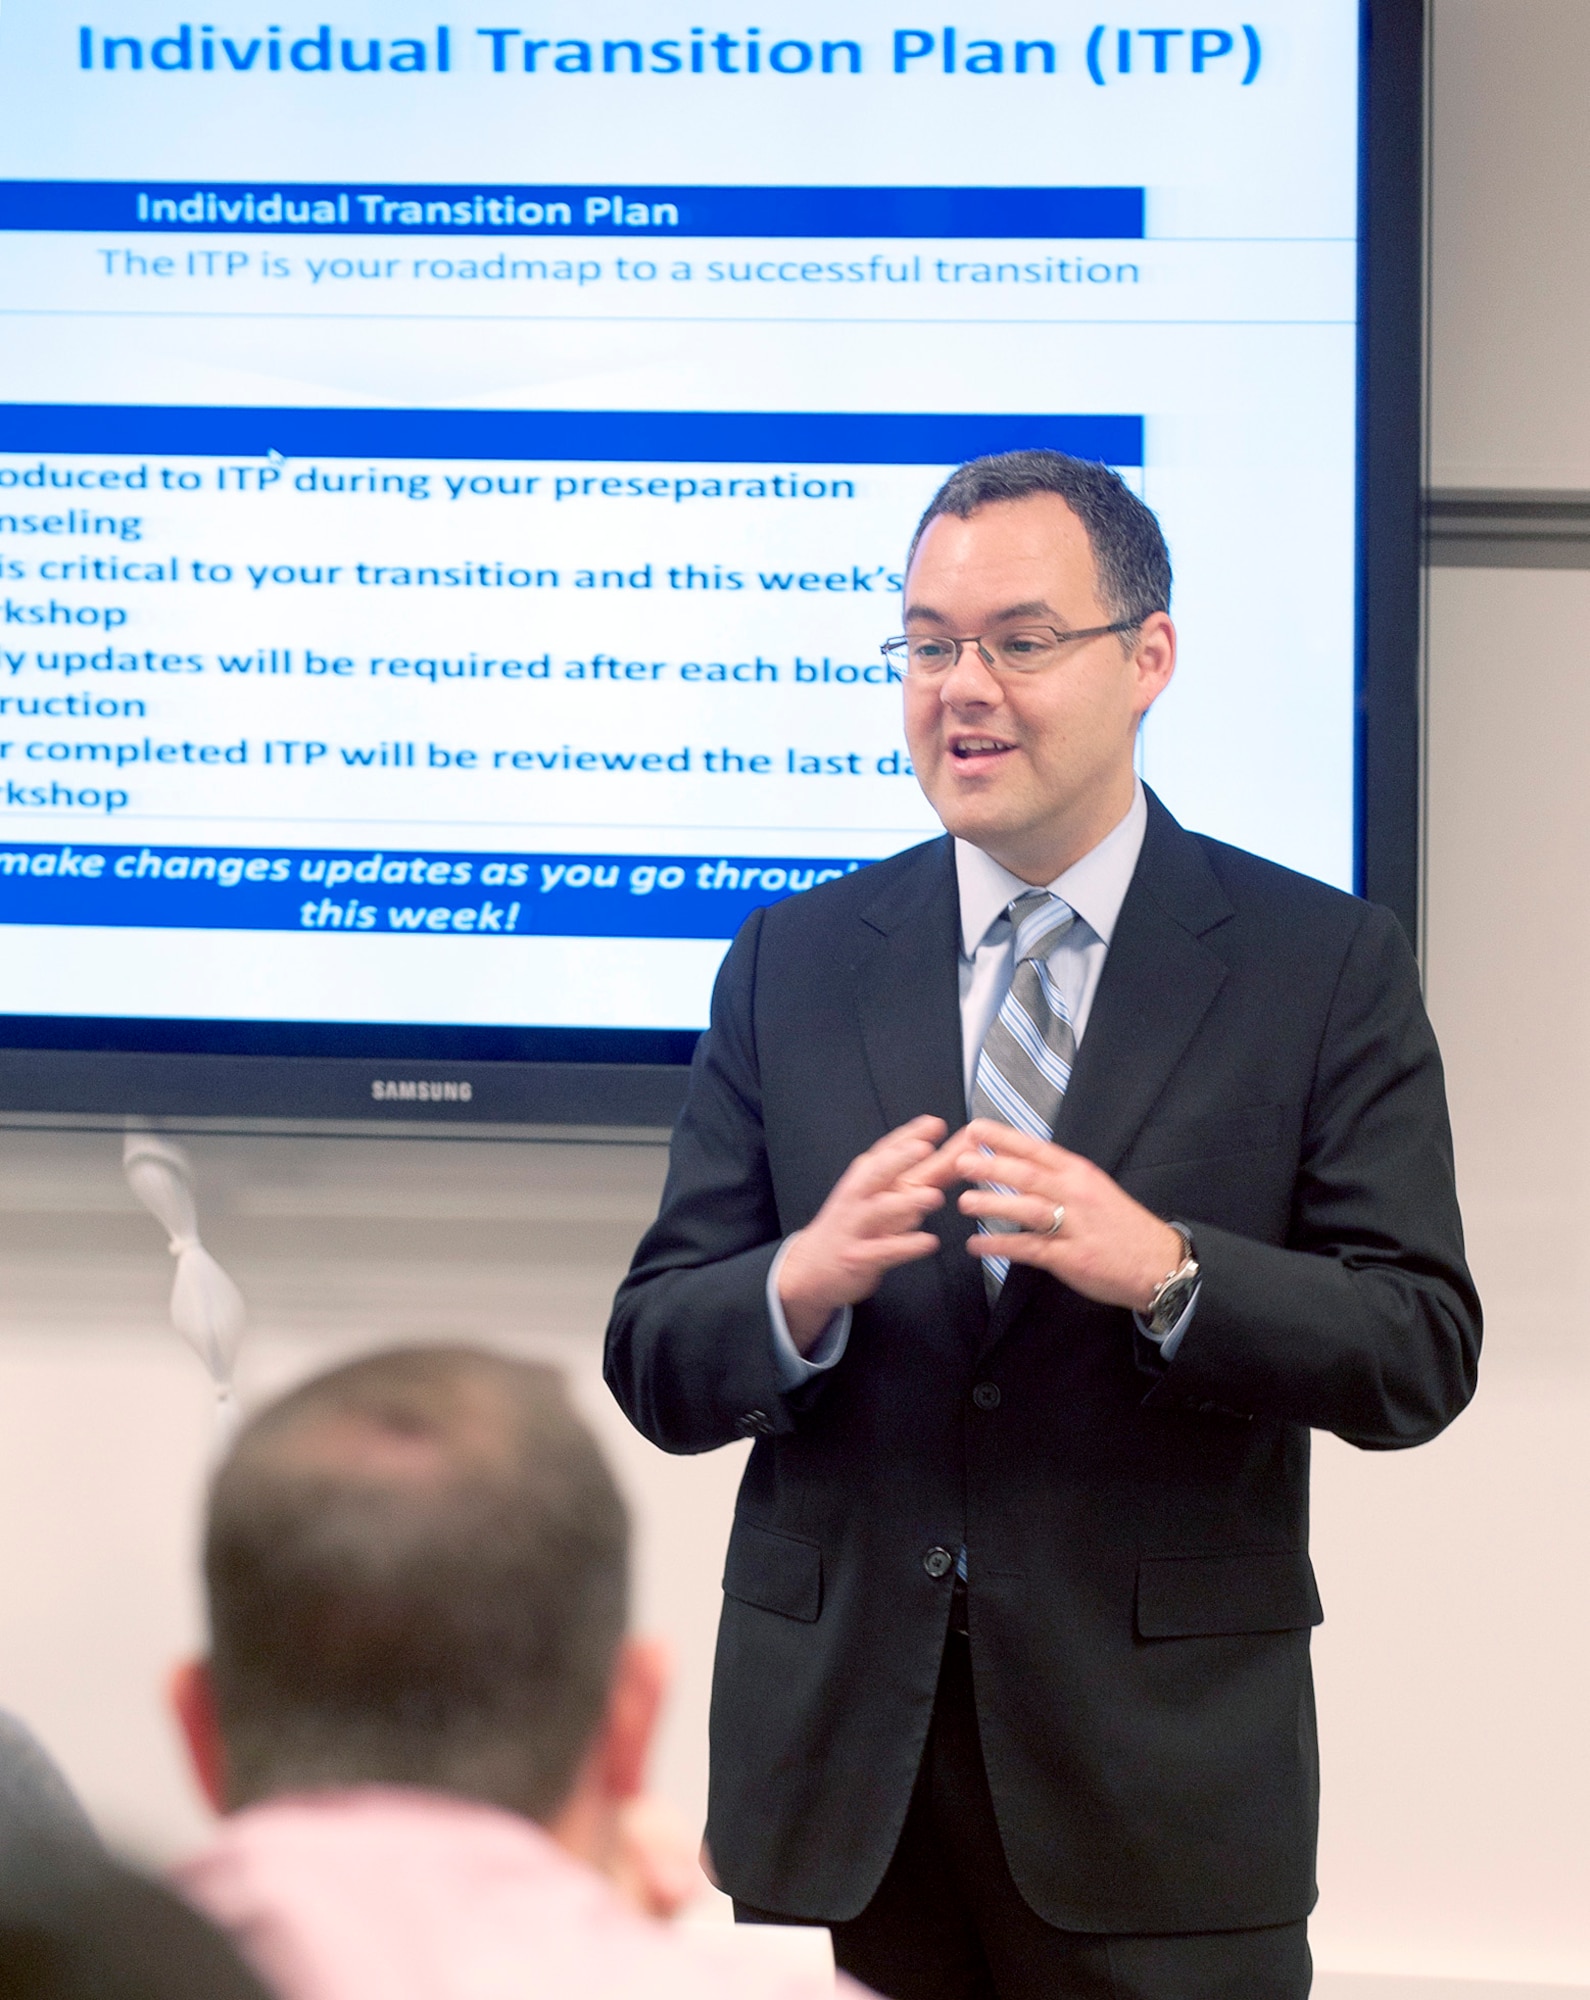 Mr. Daniel B. Ginsberg, Assistant Secretary of the Air Force for Manpower and Reserve Affairs, addresses members of a Transition Assistance Program class in the Pentagon, Washington D.C. on December 10, 2012  (U.S. Air Force photo/Andy